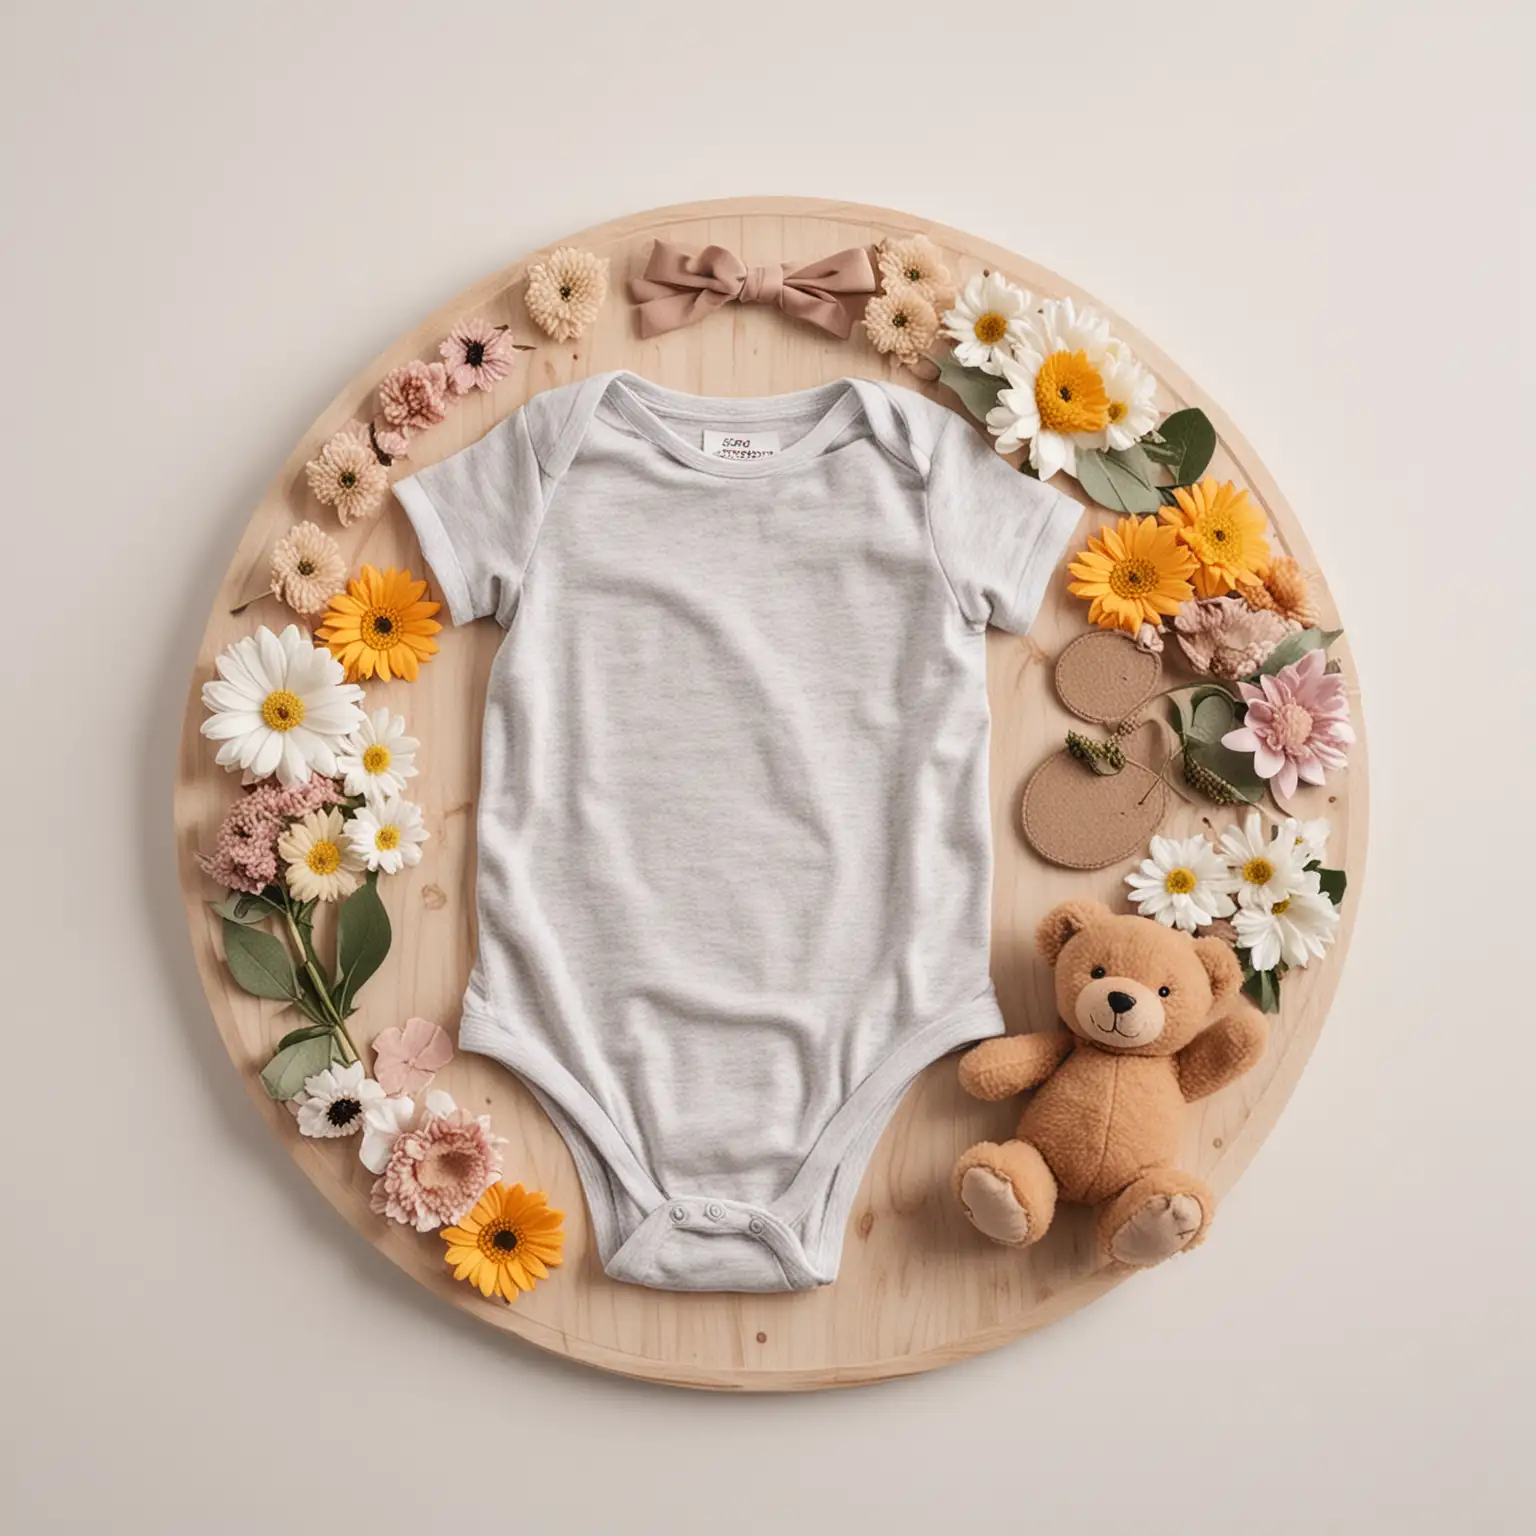 Flat lay image of a baby onesie with a round felt board, decorative flowers, a teddy bear, suitable for baby announcement, white background, 
aesthetically pleasing